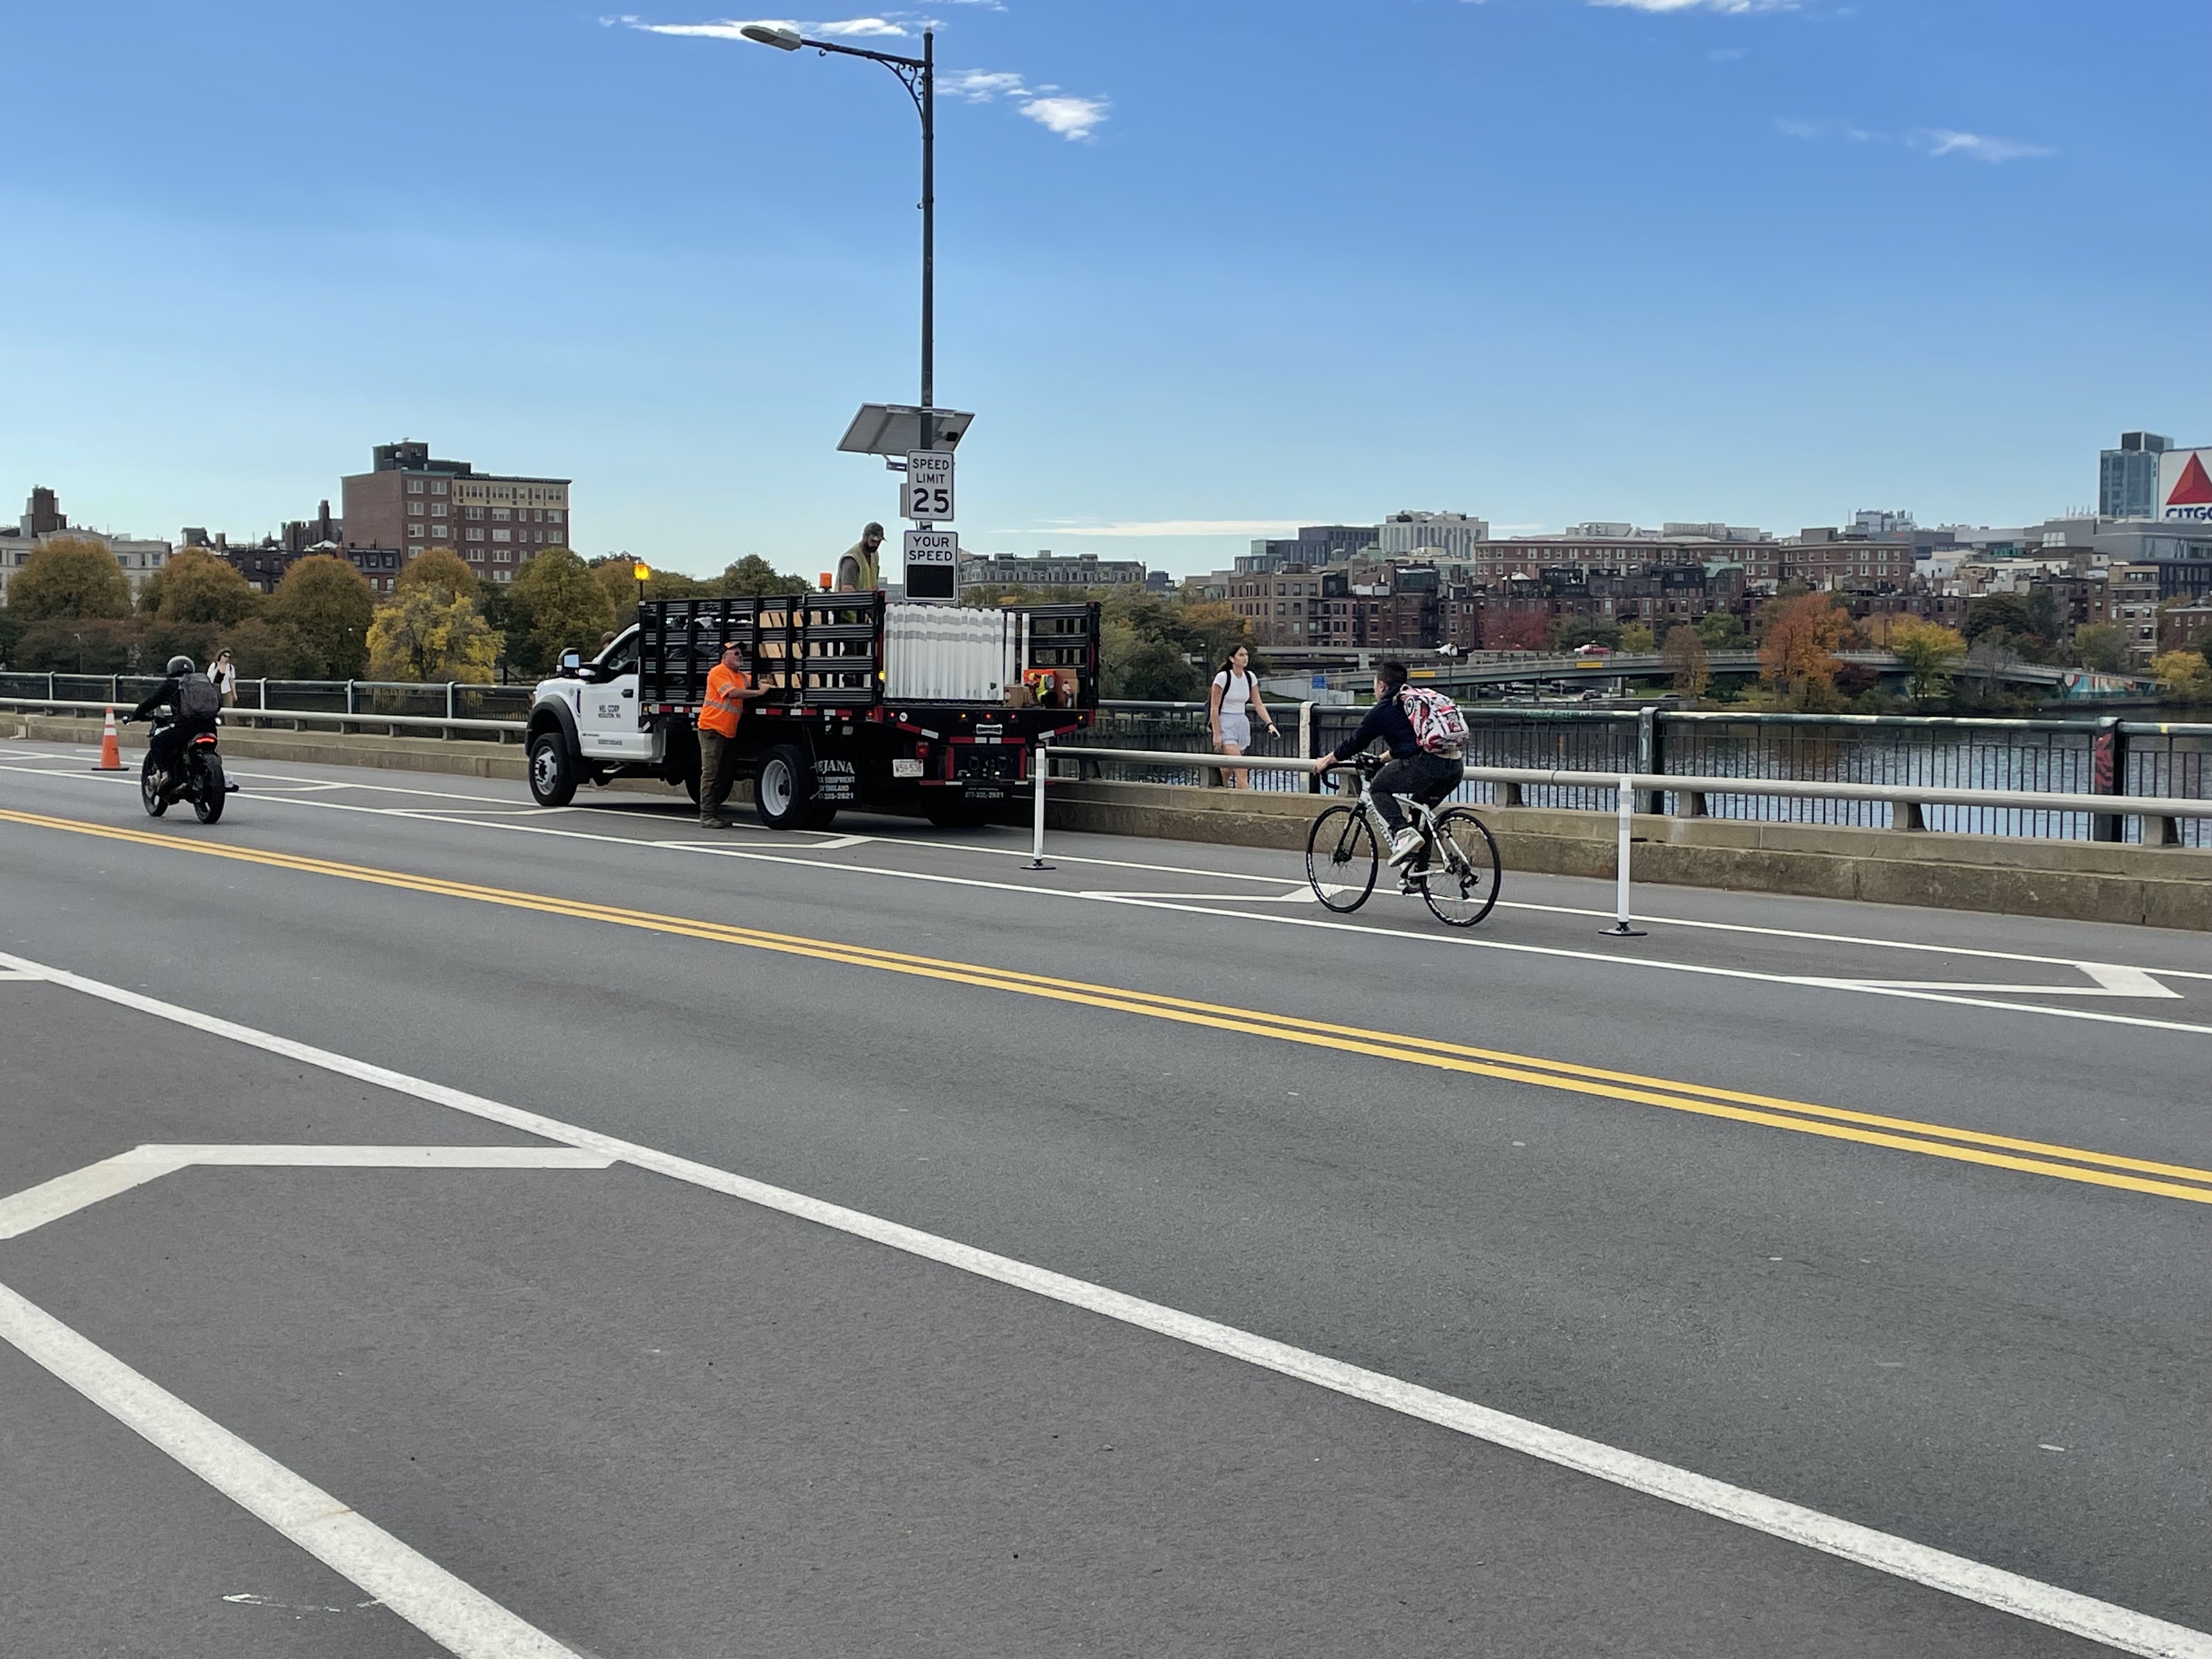 A bicyclist rides past a flatbed truck where two workers are unloading white flexible-post bollards onto the bridge deck.